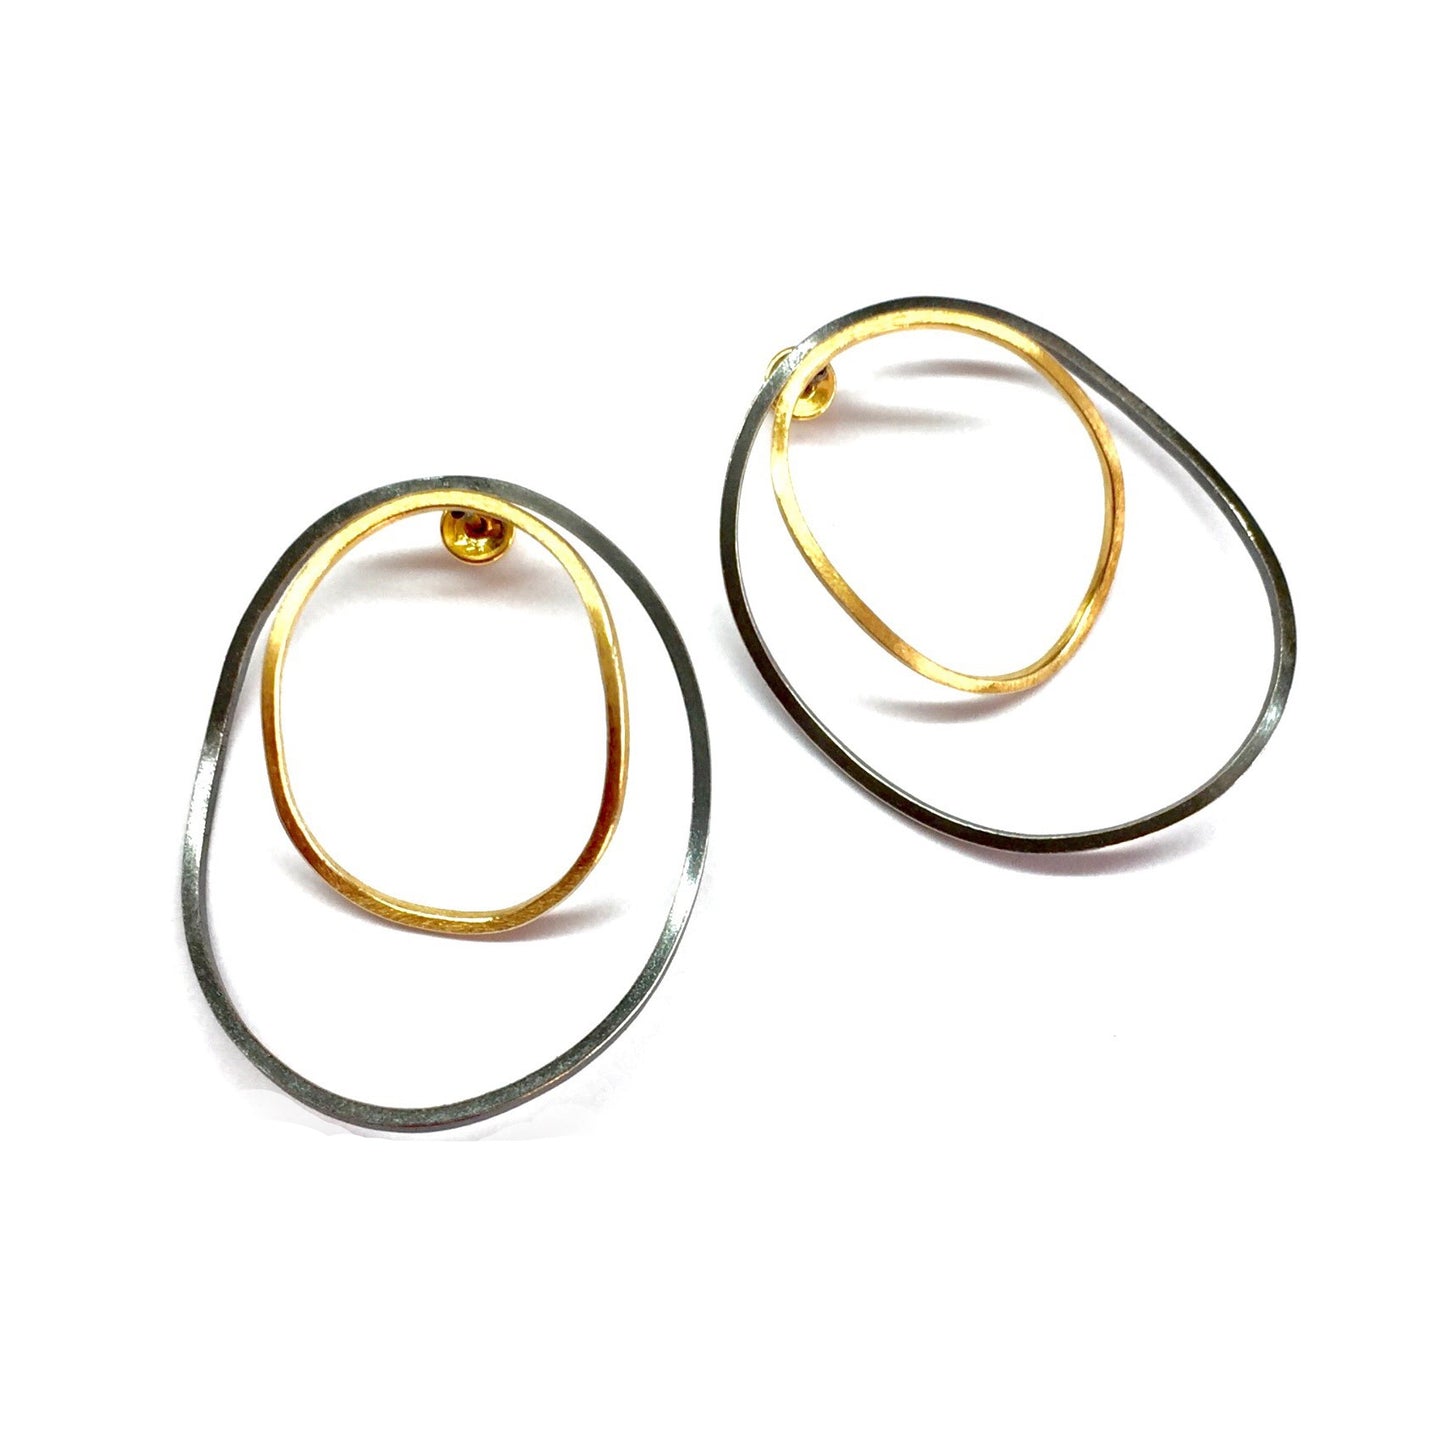 Mysterium Collection Black & Gold "Wavy Circle" Earrings